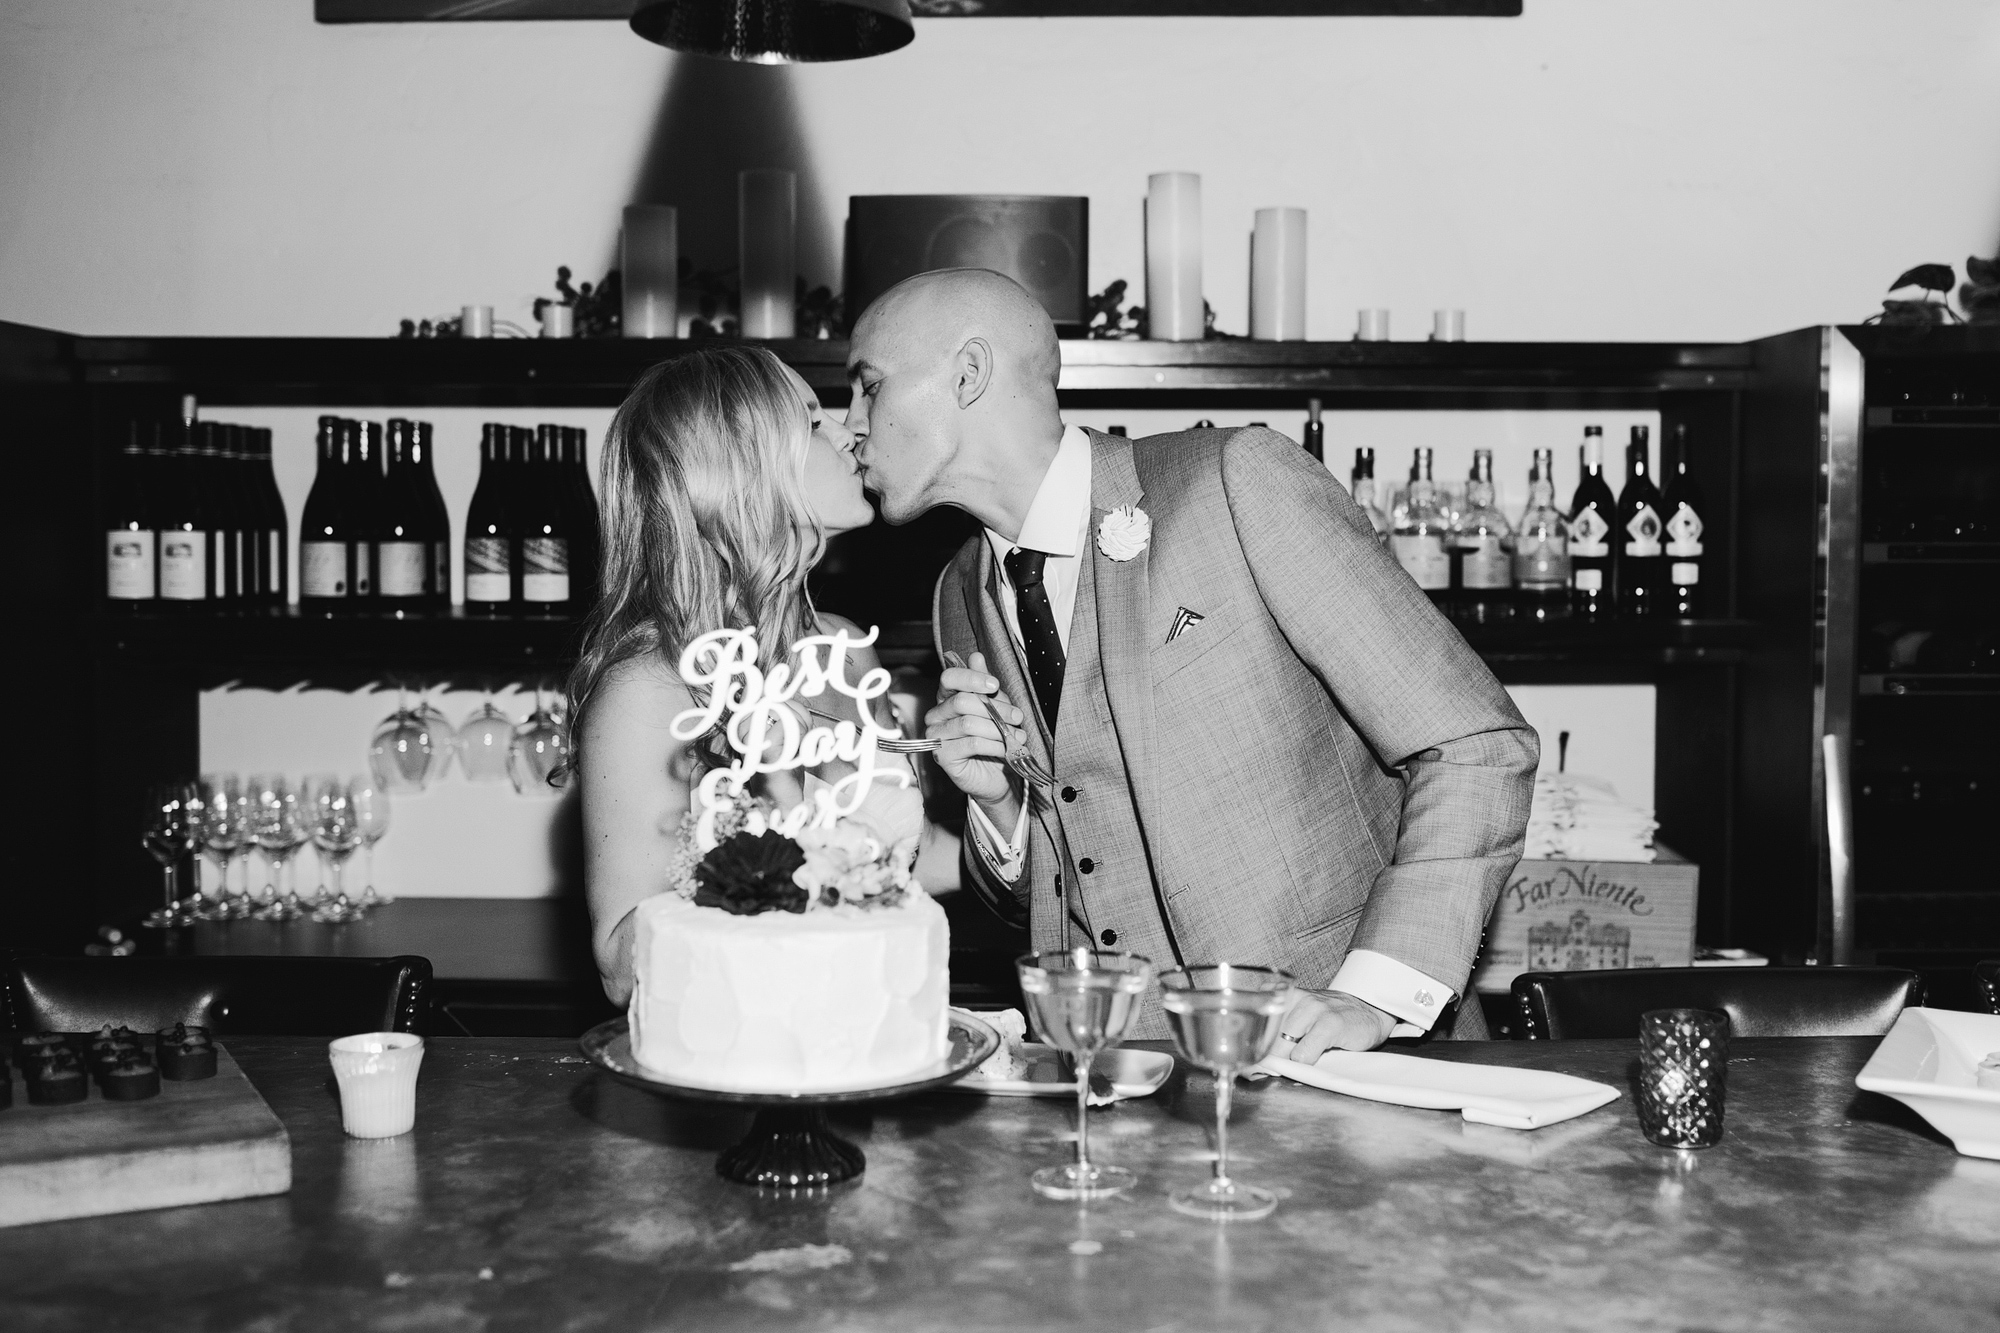 A sweet photo of the couple kissing after cake cutting. 